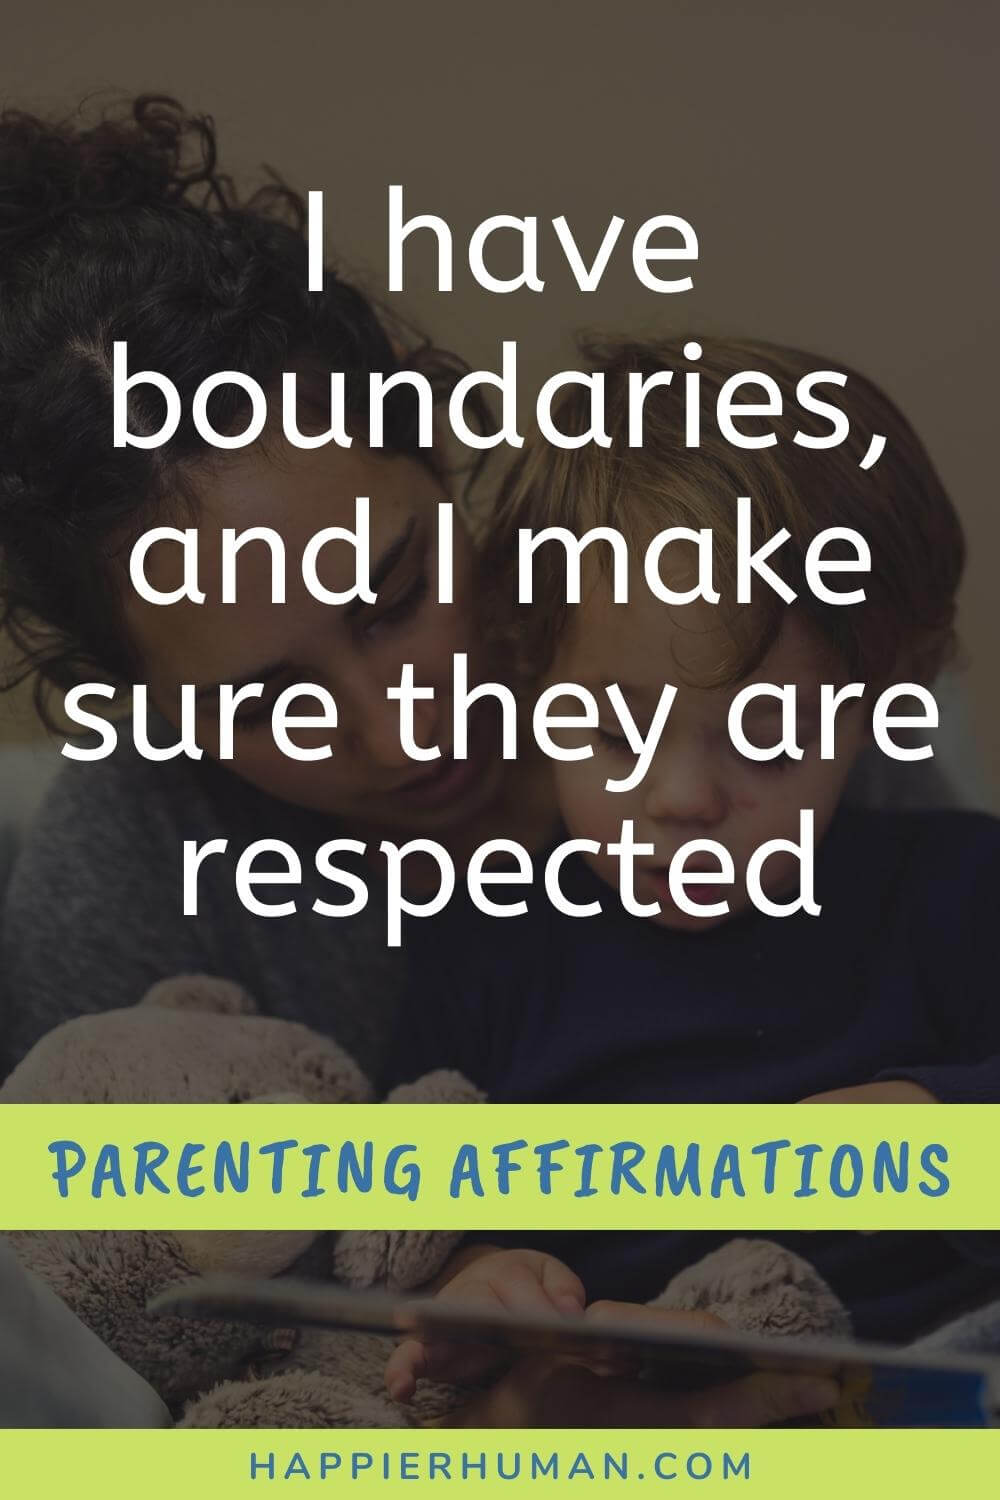 Parenting Affirmations - I have boundaries, and I make sure they are respected | co parenting affirmations | louise hay parenting affirmations | positive affirmations for good parenting